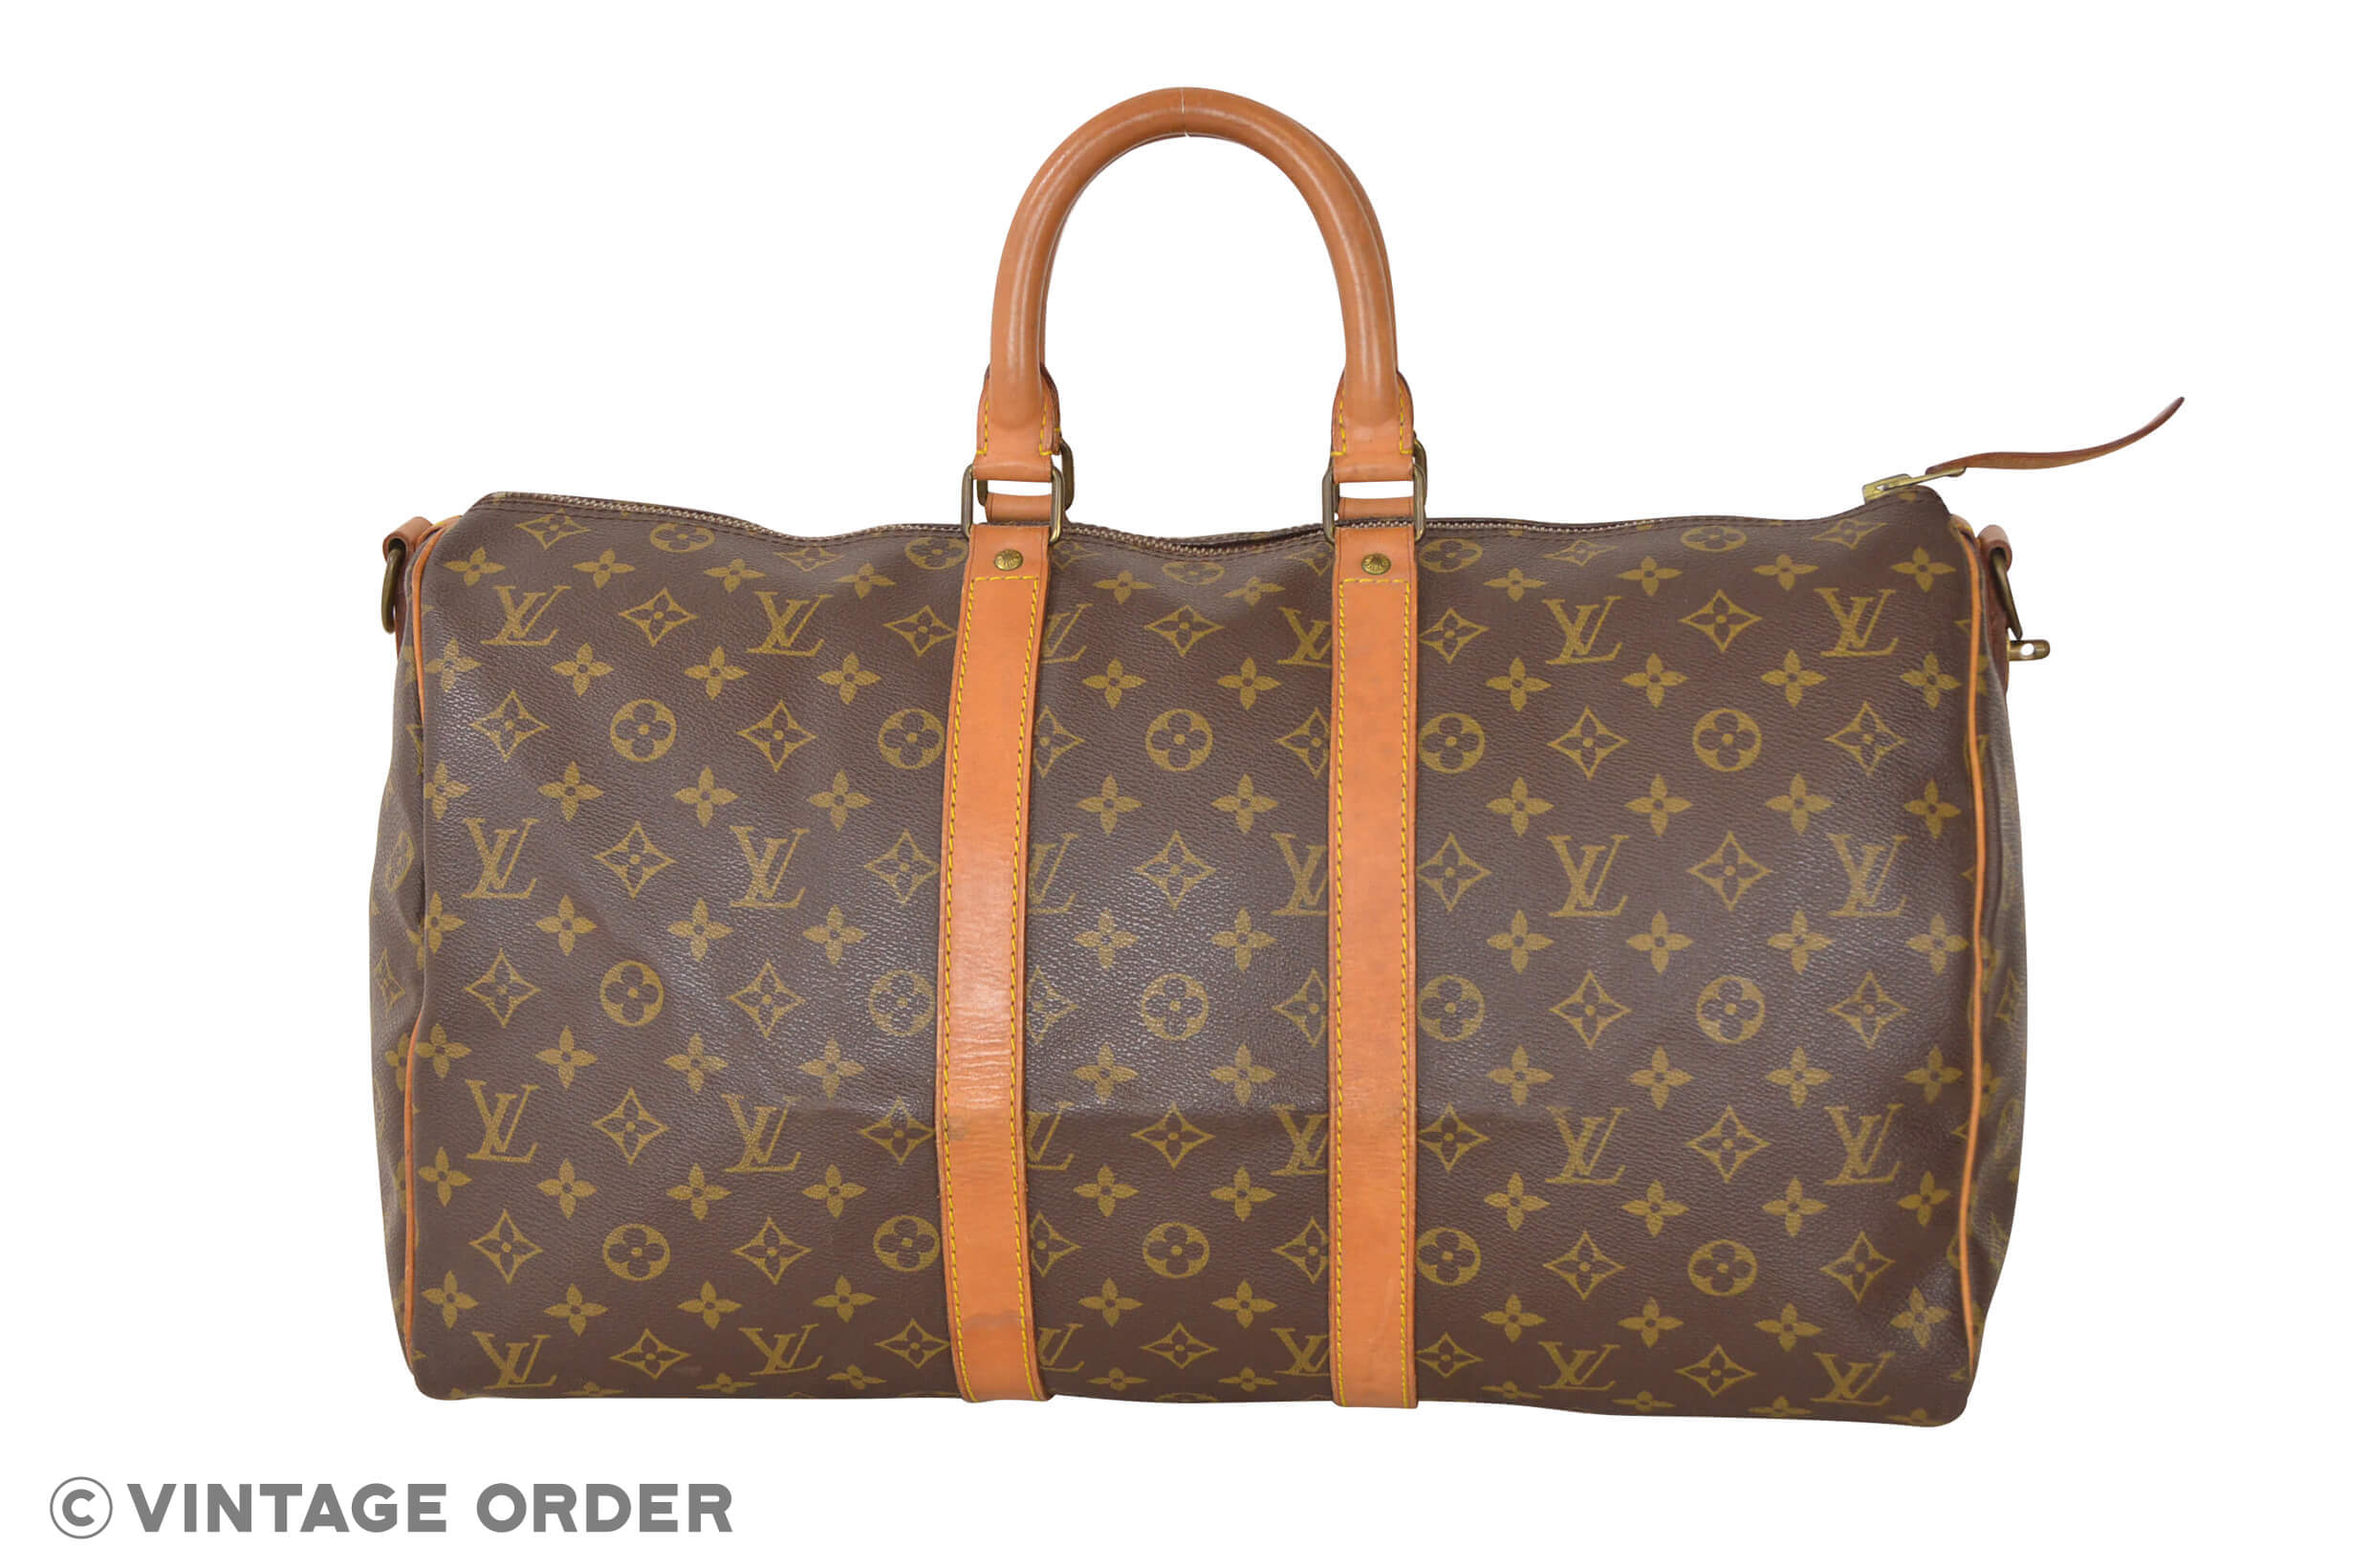 Louis Vuitton Prism Keepall Ebay | Confederated Tribes of the Umatilla Indian Reservation